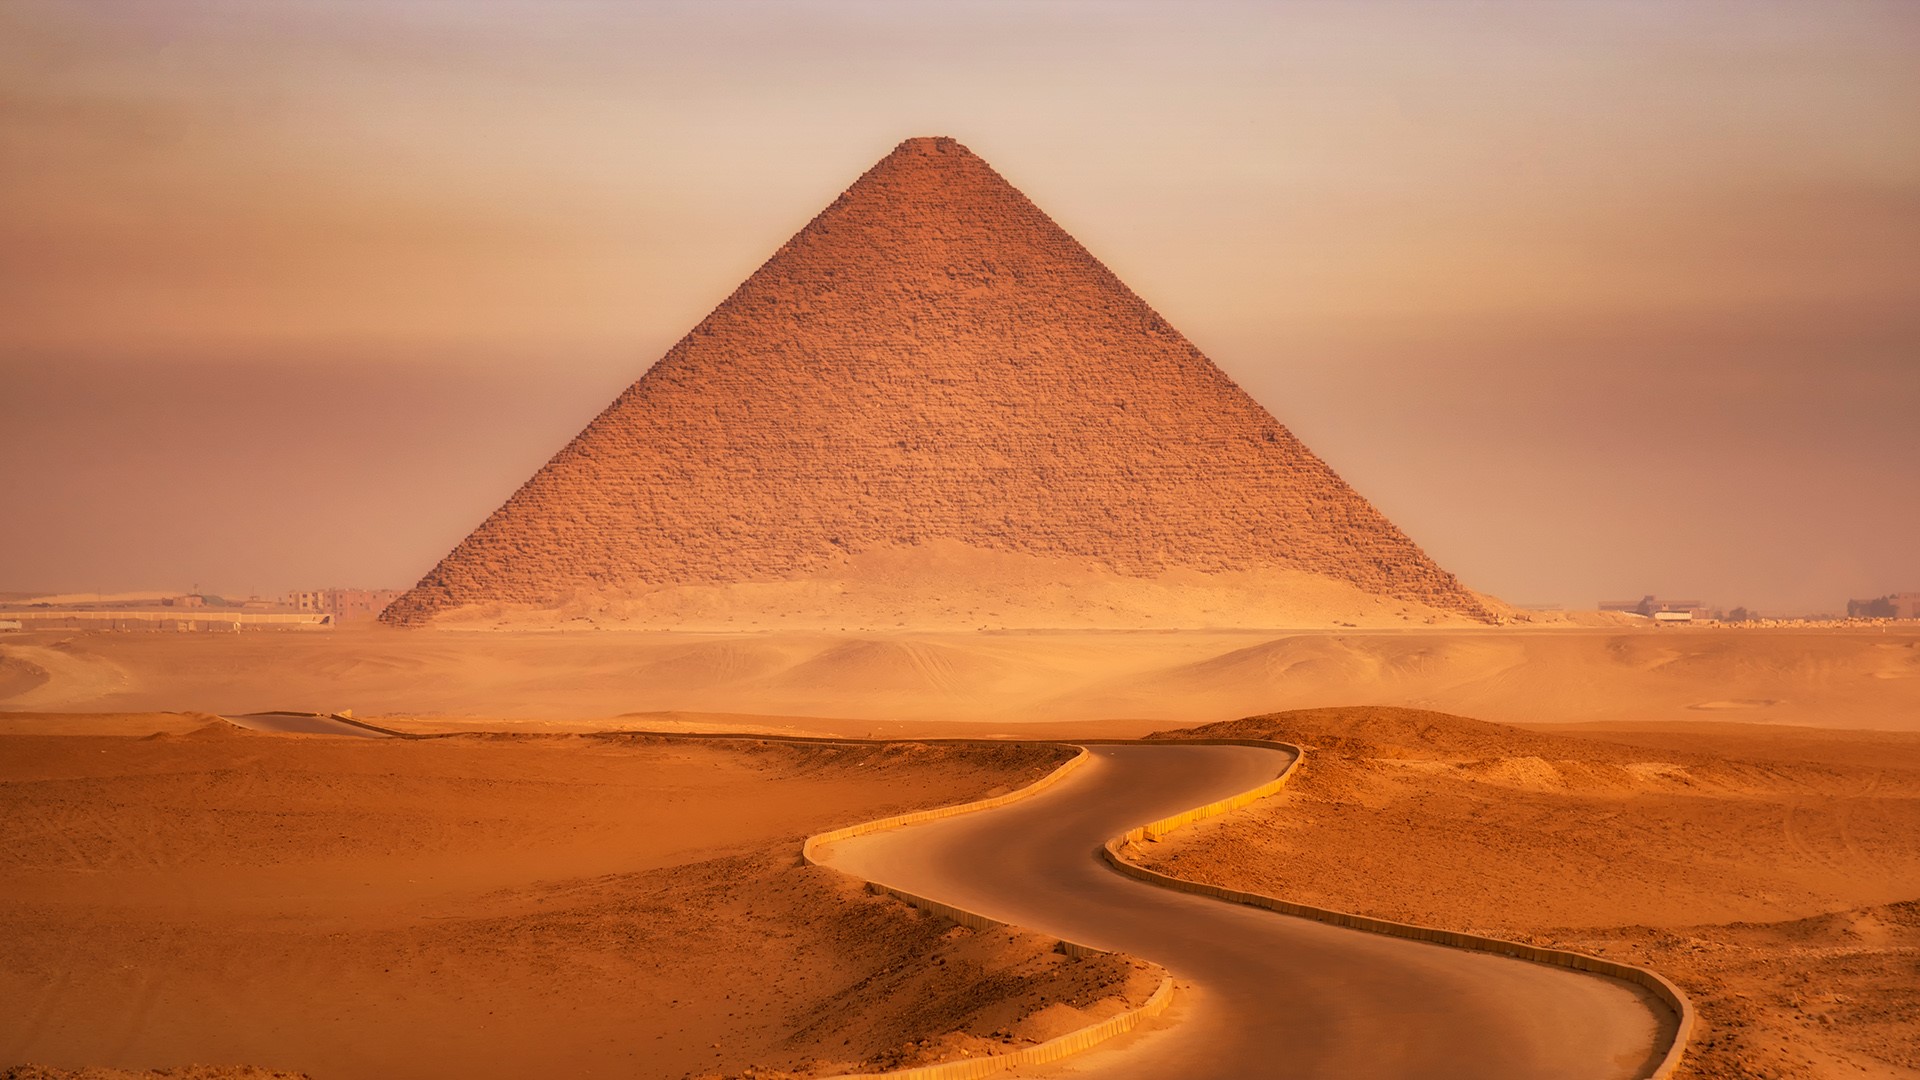 Picking Up The Pieces: The Red Pyramid